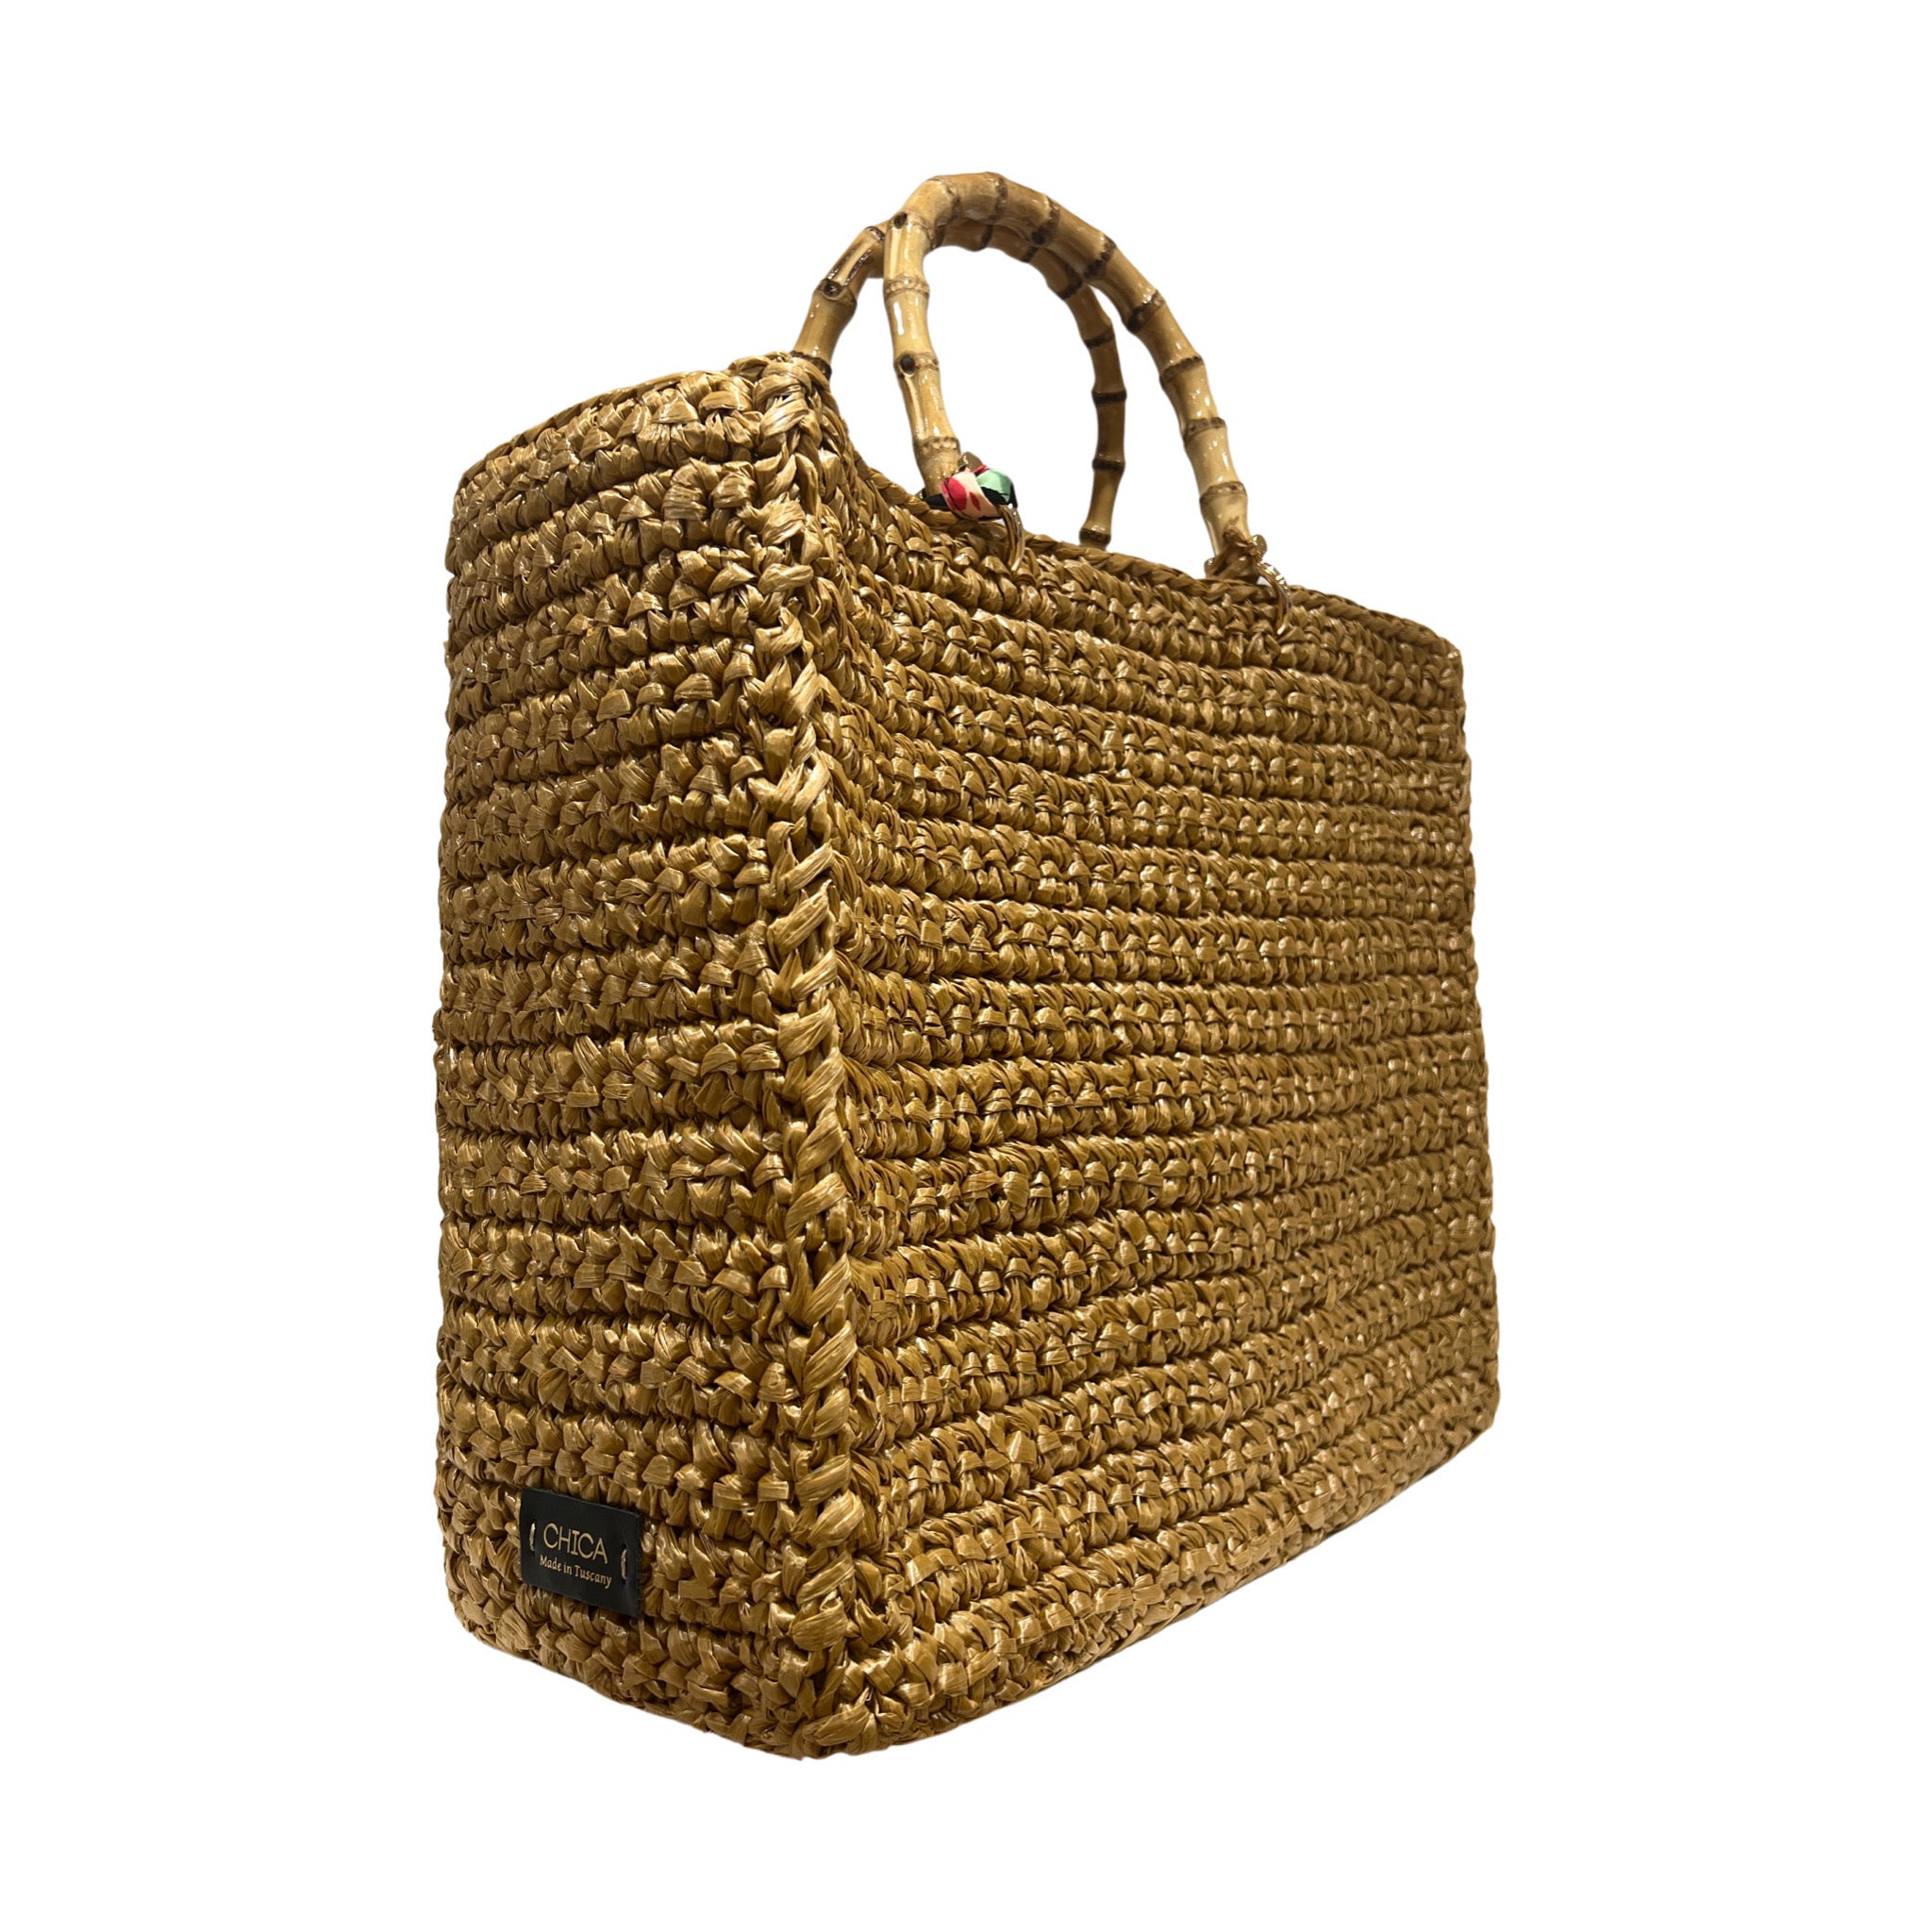 Gold Cocomero Large Tote Bag